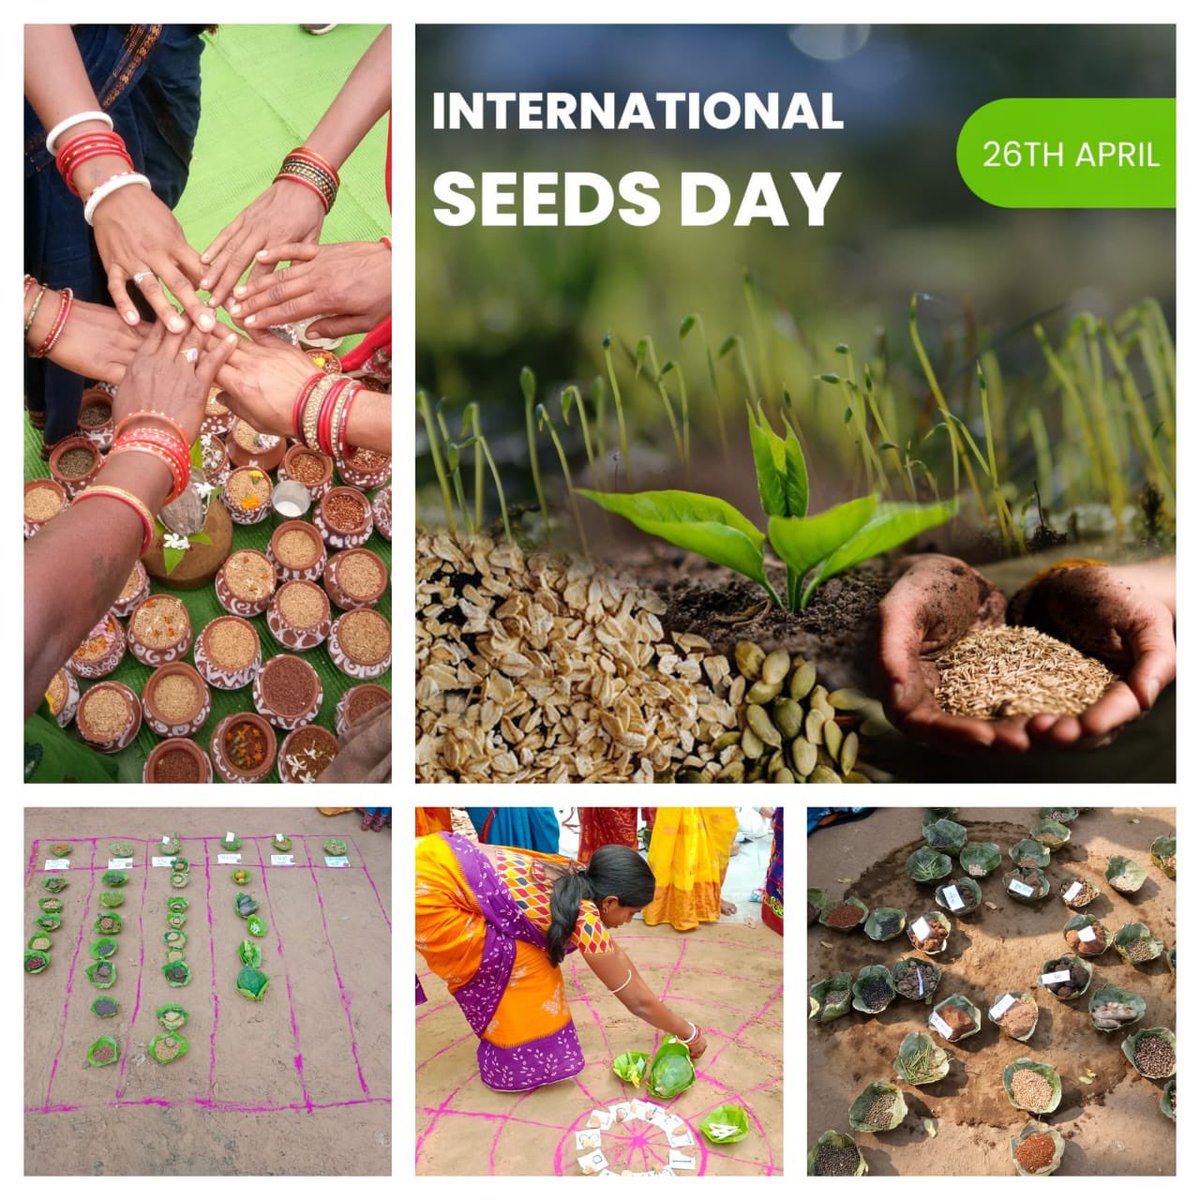 🌱 Happy International Seeds Day! Seeds are vital for biodiversity and food security. At NYDHEE, we empower farmers to conserve indigenous seeds, ensuring a greener, healthier future. #InternationalSeedDay #SeedConservation #FoodSecurity